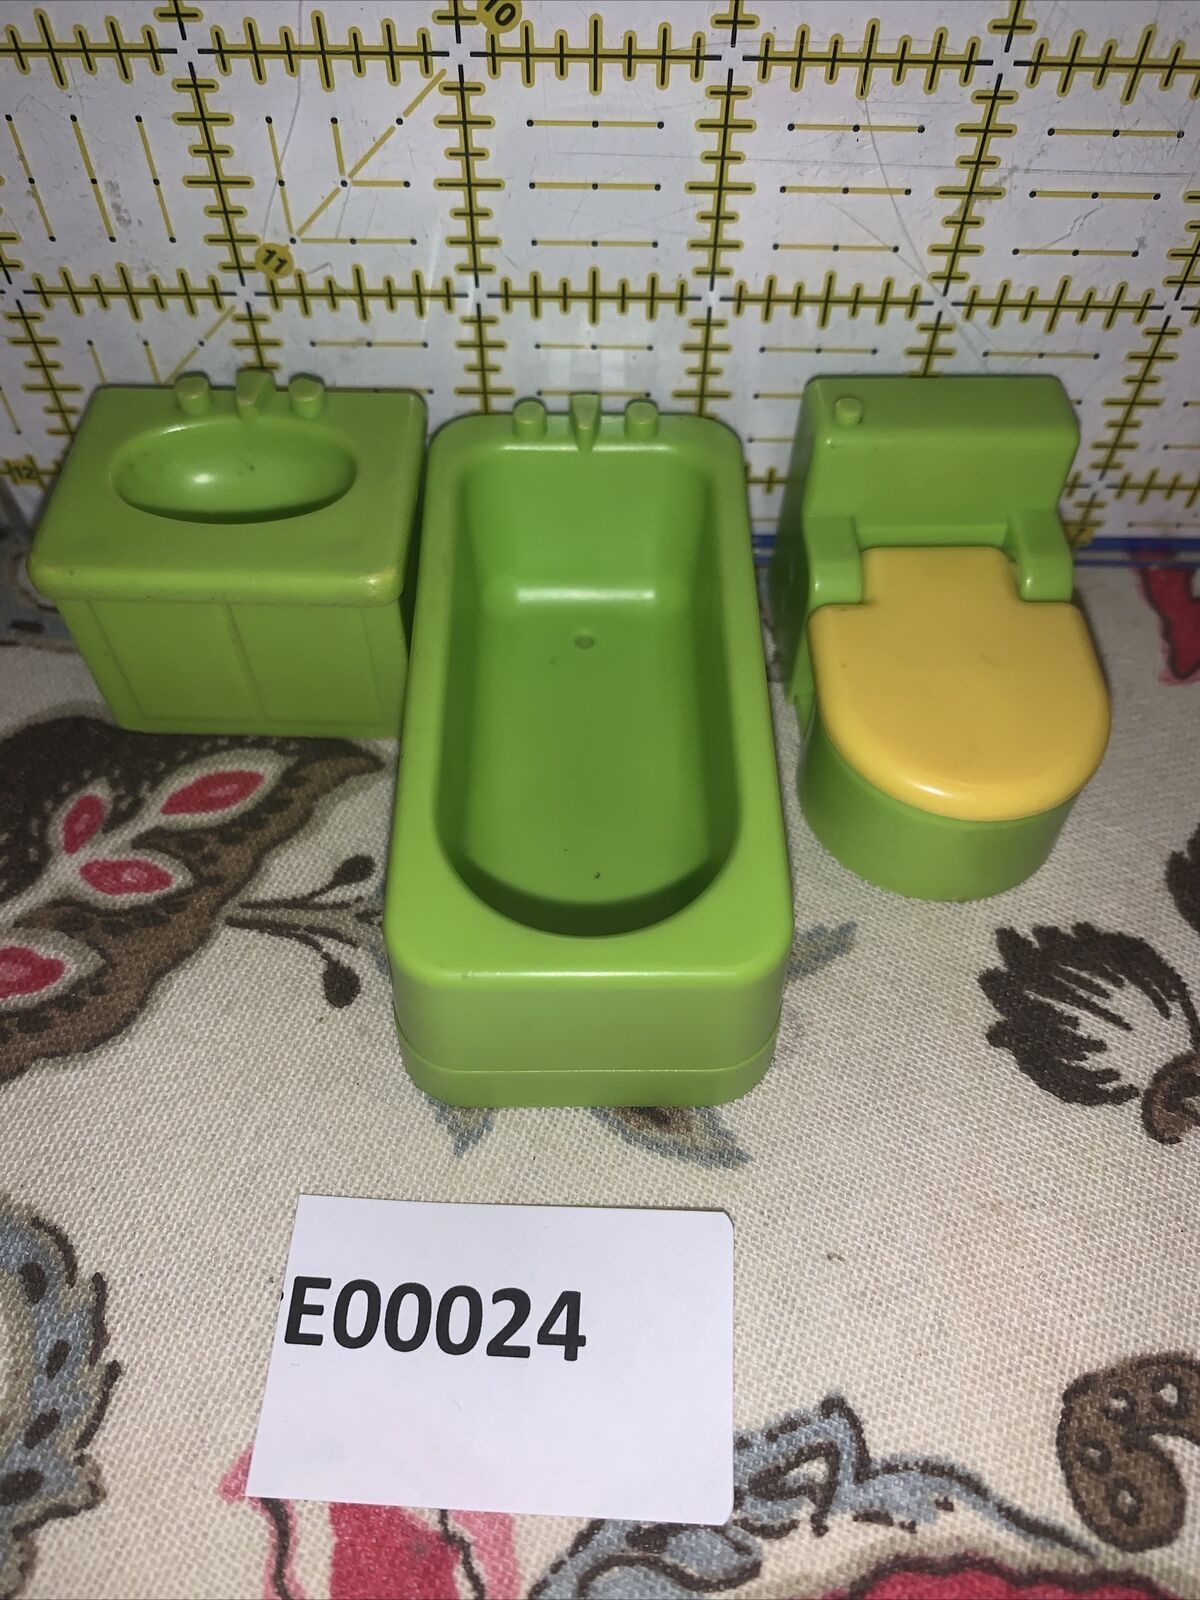 Fisher Price Vintage Tub Toilet Sink Miniature Furniture Yellow And Green E00024